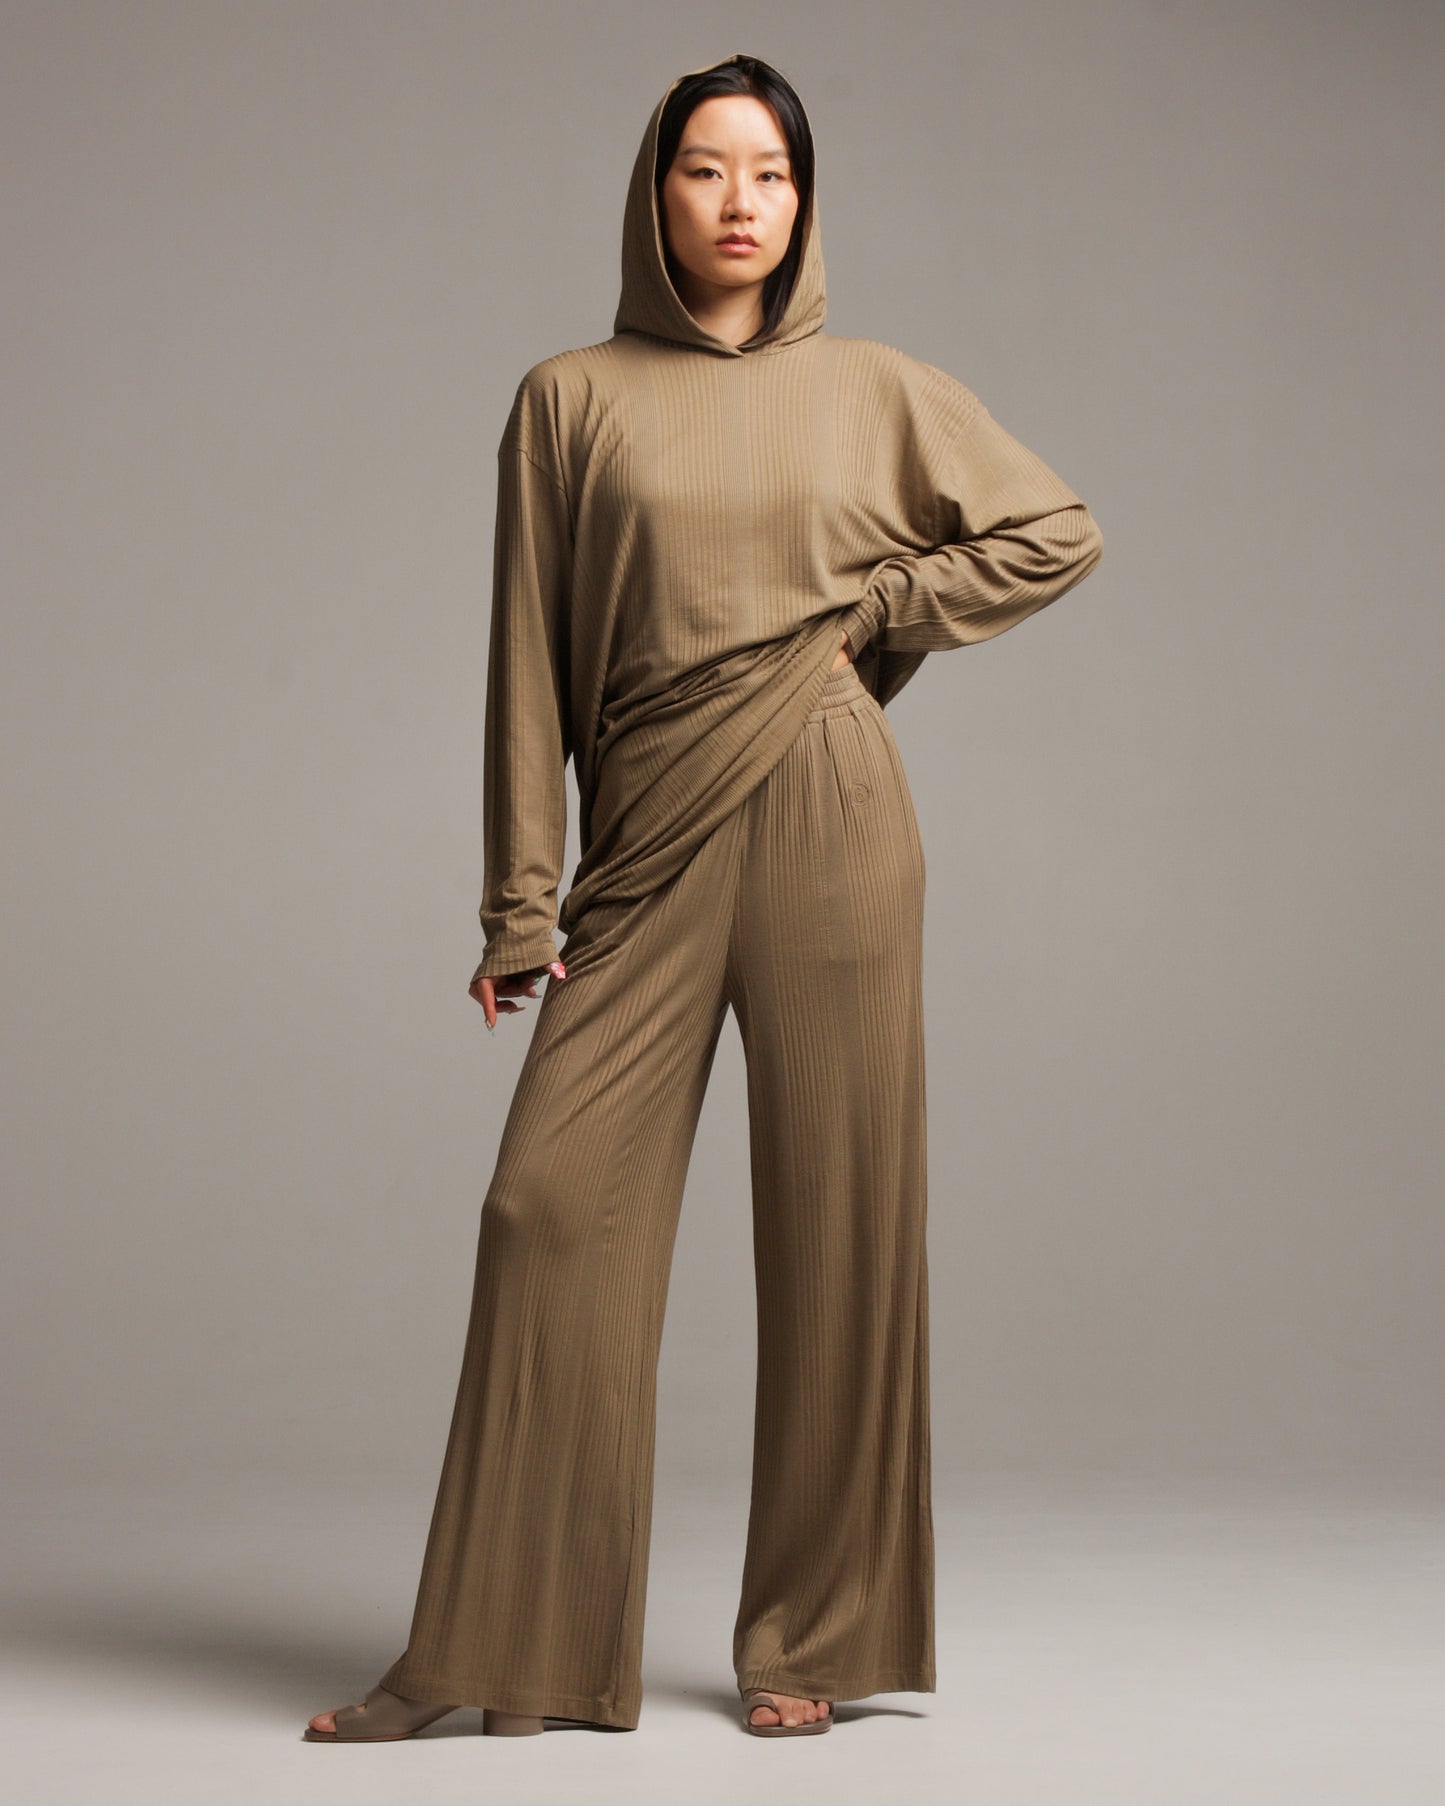 Taupe Hooded Lounge Dress